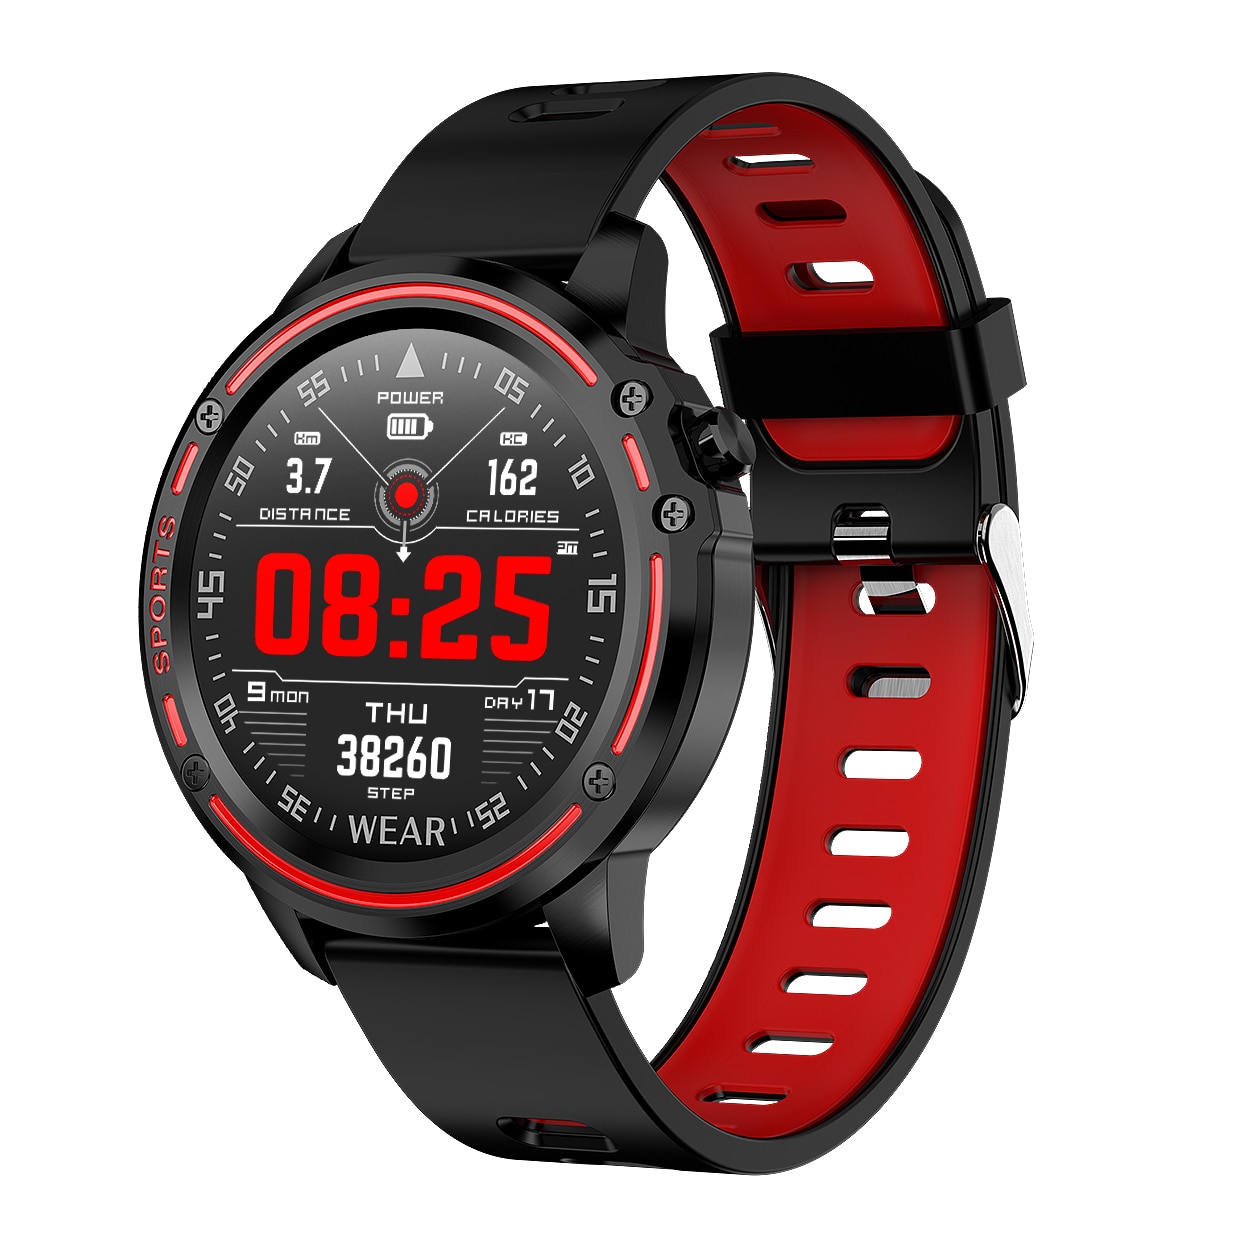 L8 Smart Watch Men IP68 Waterproof Reloj Hombre Mode SmartWatch With ECG PPG Blood Pressure Heart Rate sports fitness watches